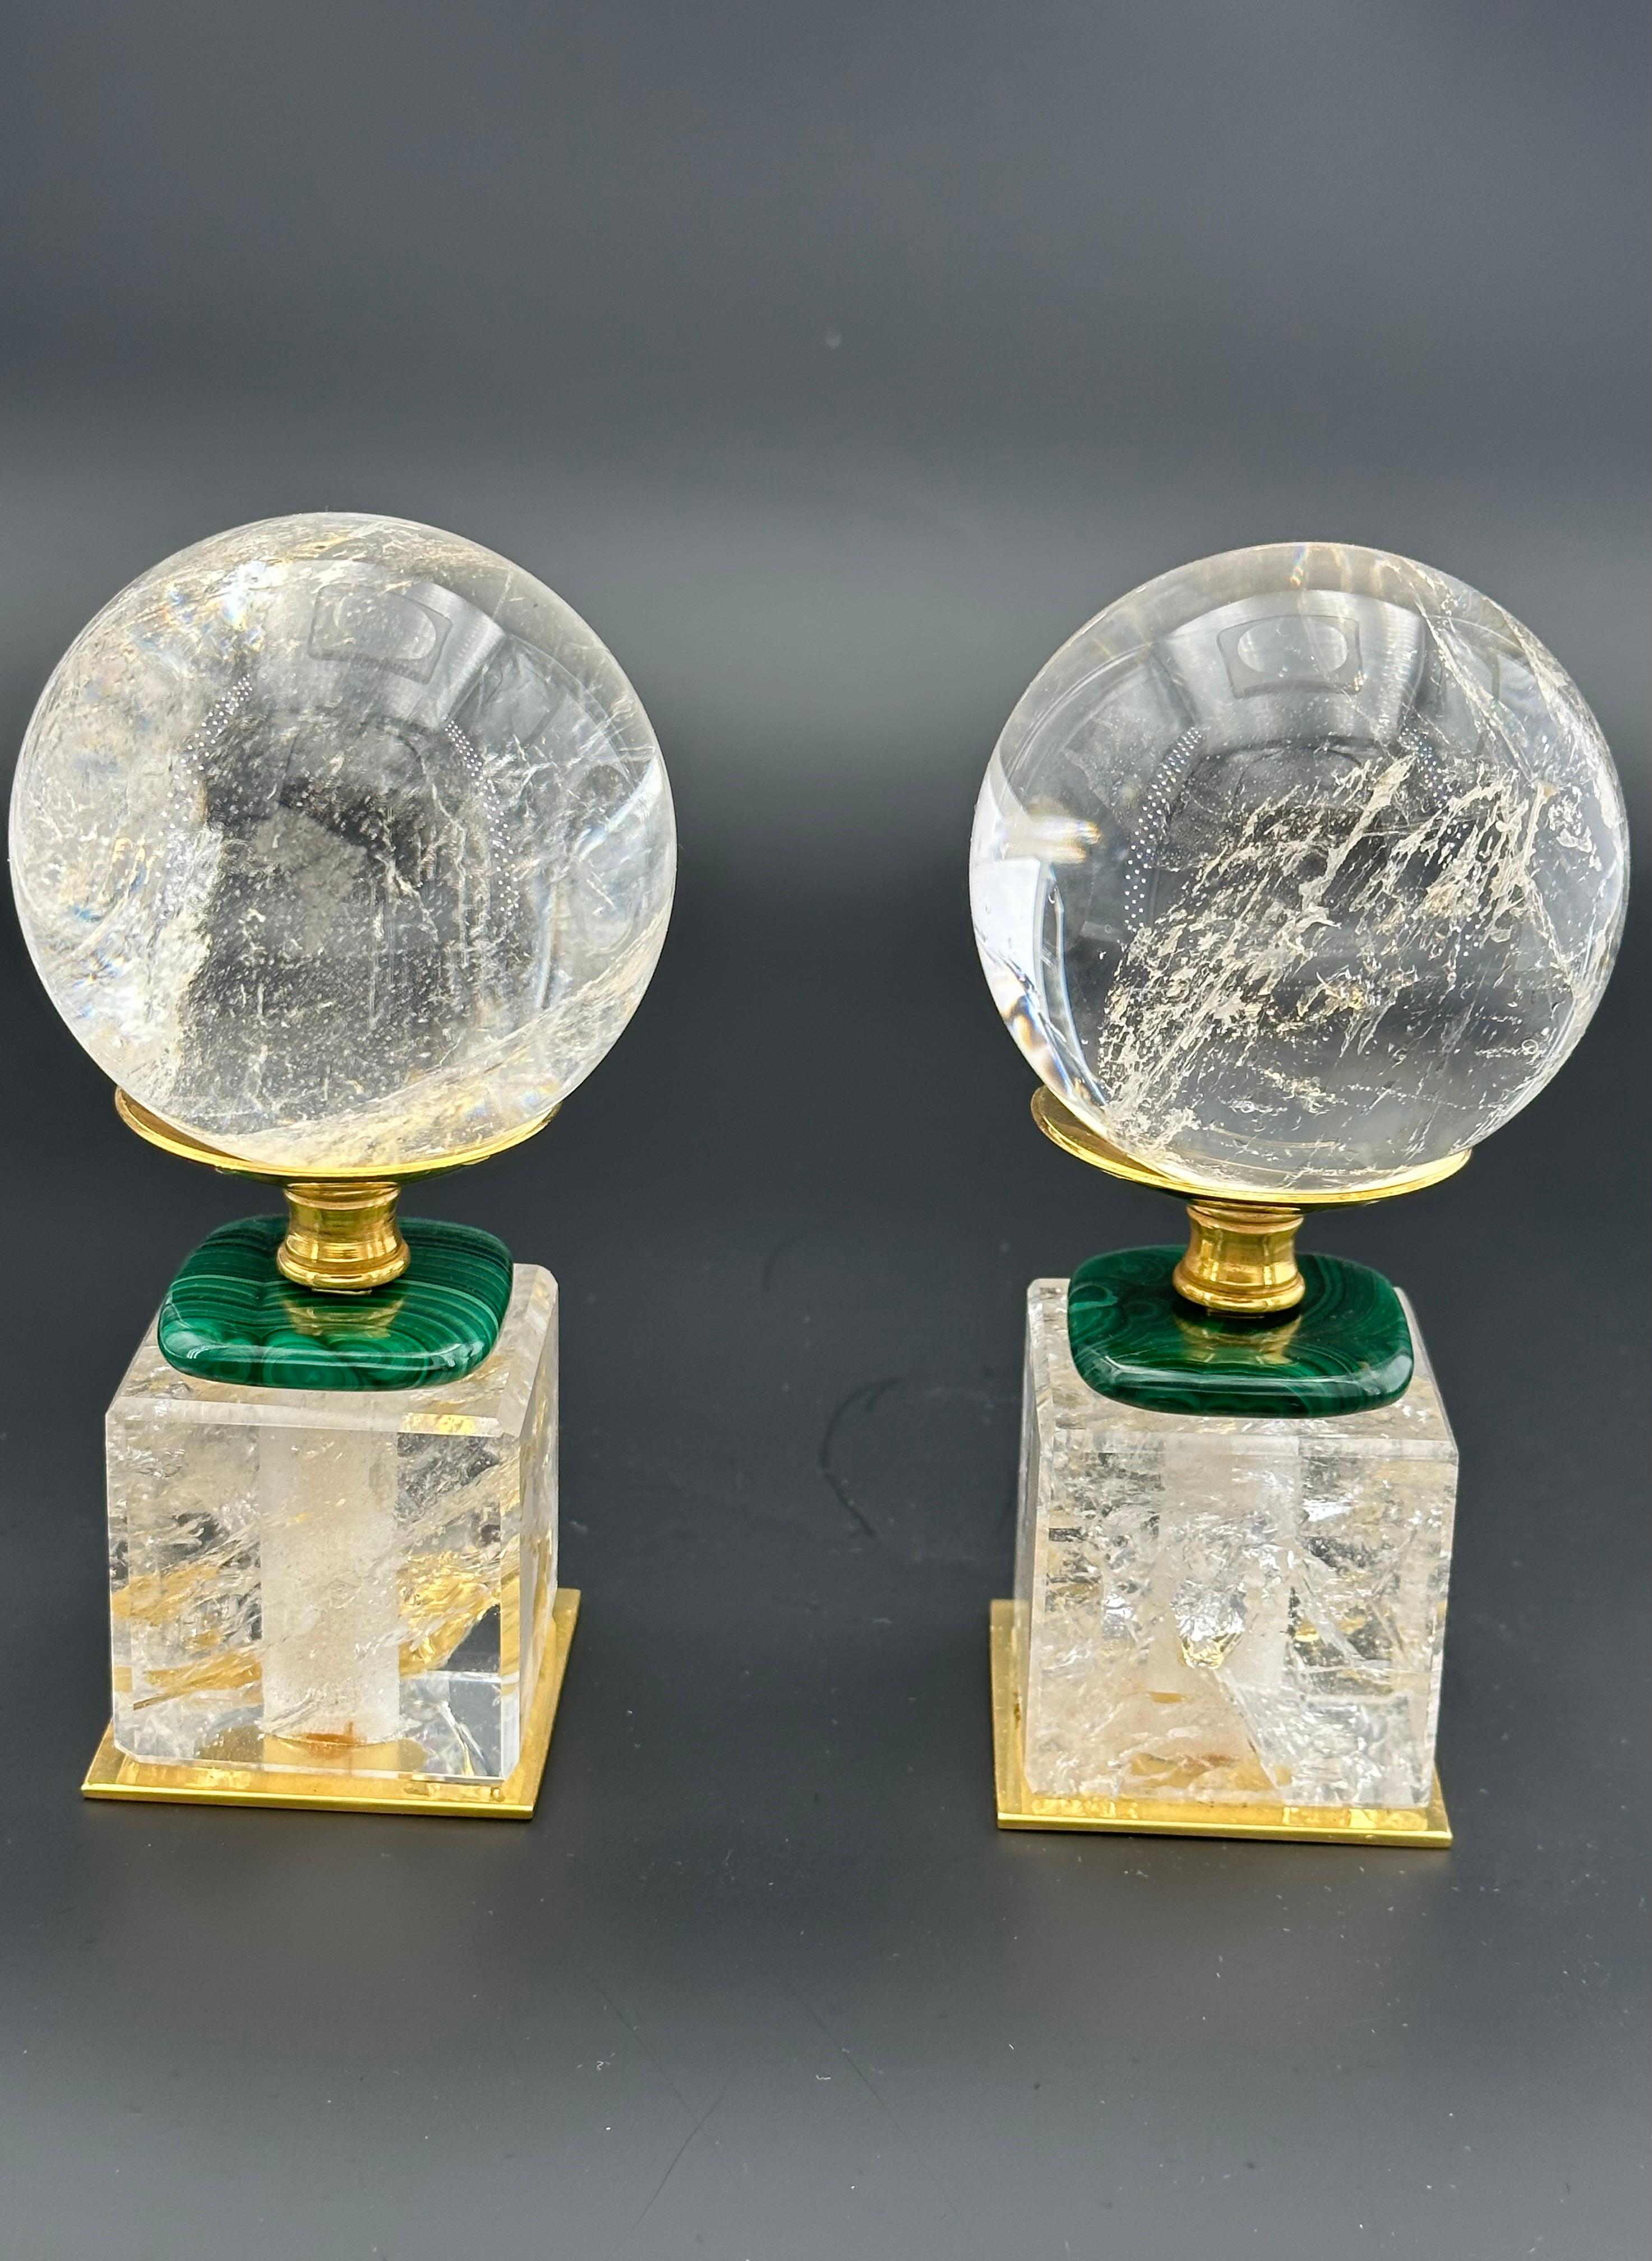 Amazing pair of rock crystal spheres (70 mm)with their customized rock crystal and malachite support and 24 K gold-plated brass.
Made in FRANCE .